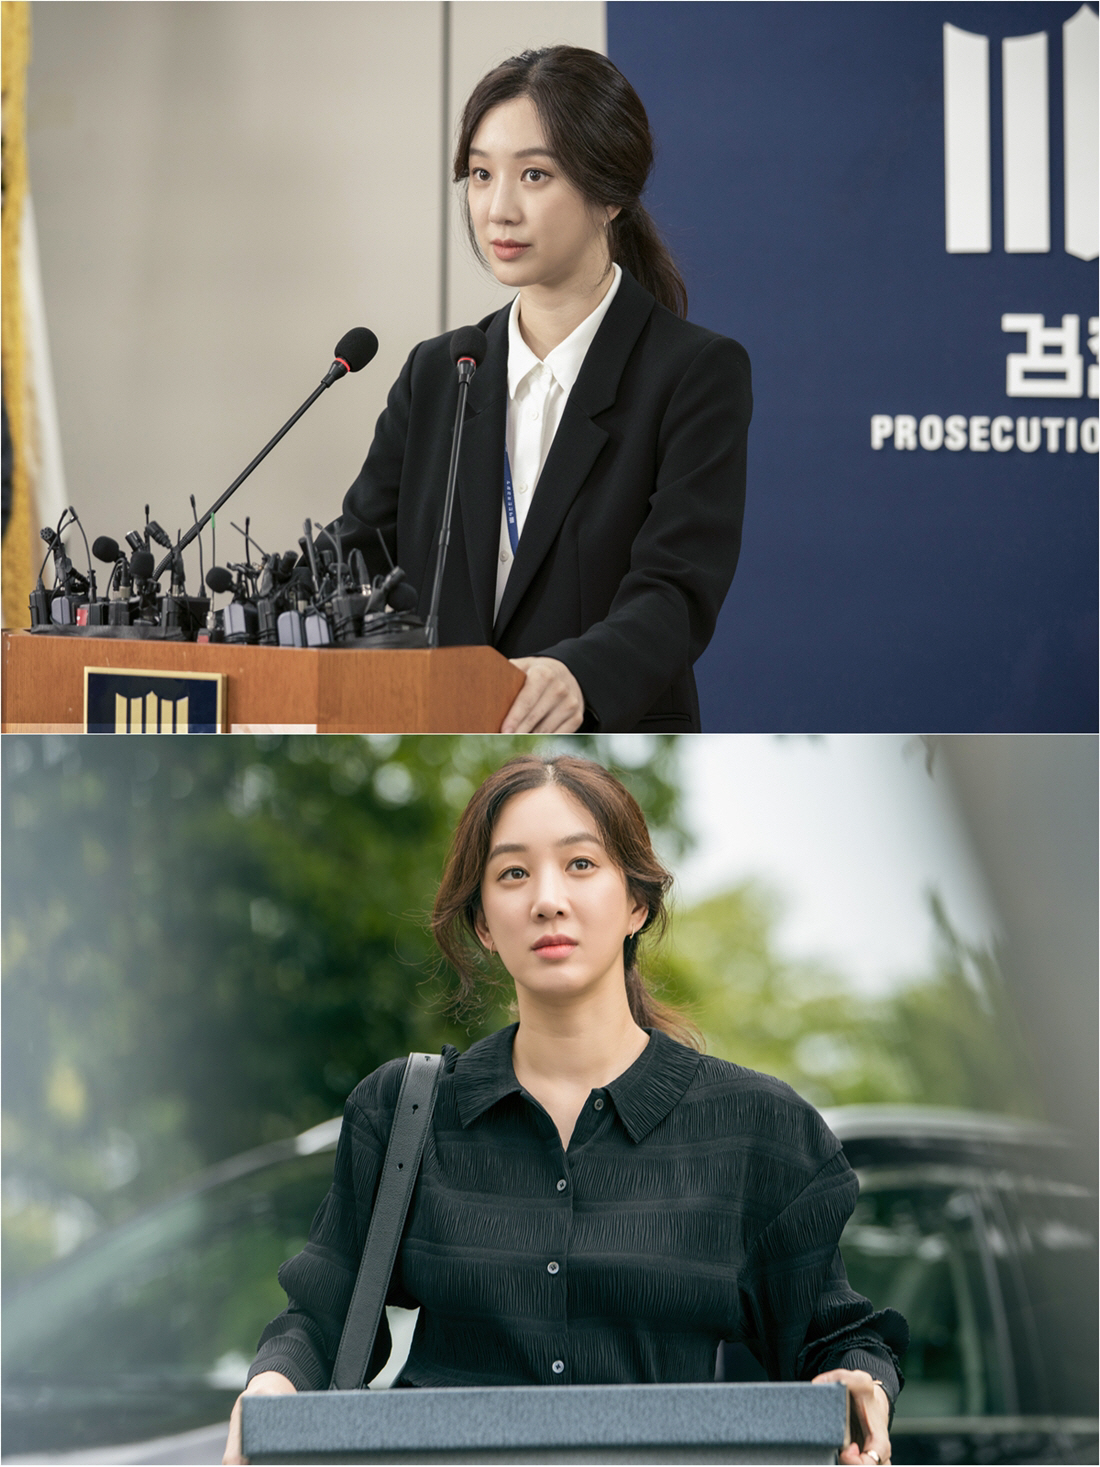 JTBCs expected second half of the Inspection Civil War Jung Ryeo-wons still cut was first released.JTBC New Moonhwa Drama Inspection Civil War is a story of ordinary inspection who lives every day in local city Jinyoung, not a colorful lawyer in the media.Jung Ryeo-won transforms into an inspection Car Pearl that has a strong ability, passion for work, and responsibility.Car Pearl, a senior inspection who has never missed a senior for four years in college, has passed the judicial examination as a senior, and even the training center has graduated as a senior.The prosecution, which said that the workplace was a disprovement of the ability, went so well that it had never gone down below Seoul for 11 years, but is not everything in the world going their way?With only one slip, the master will be issued to the rural village Jinyoung, called The exile of Inspections.I wonder how she will change in a peaceful and quiet rural city Jinyoung, who has lived a lifetime of intense and passionate life.Among them, Car Pearl Inspection, which was on the podium today (15th), with neatly tied hair and neat suits in a still cut.The clear eyes and the imposing attitude that stare at the front stand out.On the other hand, in the following steel cut, a famous person who came to the newly issued Jinyoung branch office with a beautiful box of documents was caught.I am curious about the first broadcast that will be able to adapt safely to Jinyoung life, which is far from the brilliant history she has lived.The production team said, Jung Ryeo-won, who draws any character with his own distinctive charm with a wide spectrum of acting, expects to capture the hearts of viewers once again with Car Pearl of Inspection Civil War. In a peaceful and quiet rural city, I would like to ask for your expectation and interest until the first broadcast of the Specification Civil War. Inspection Civil War will be broadcasted at JTBC at 9:30 pm on Monday, December 16th.